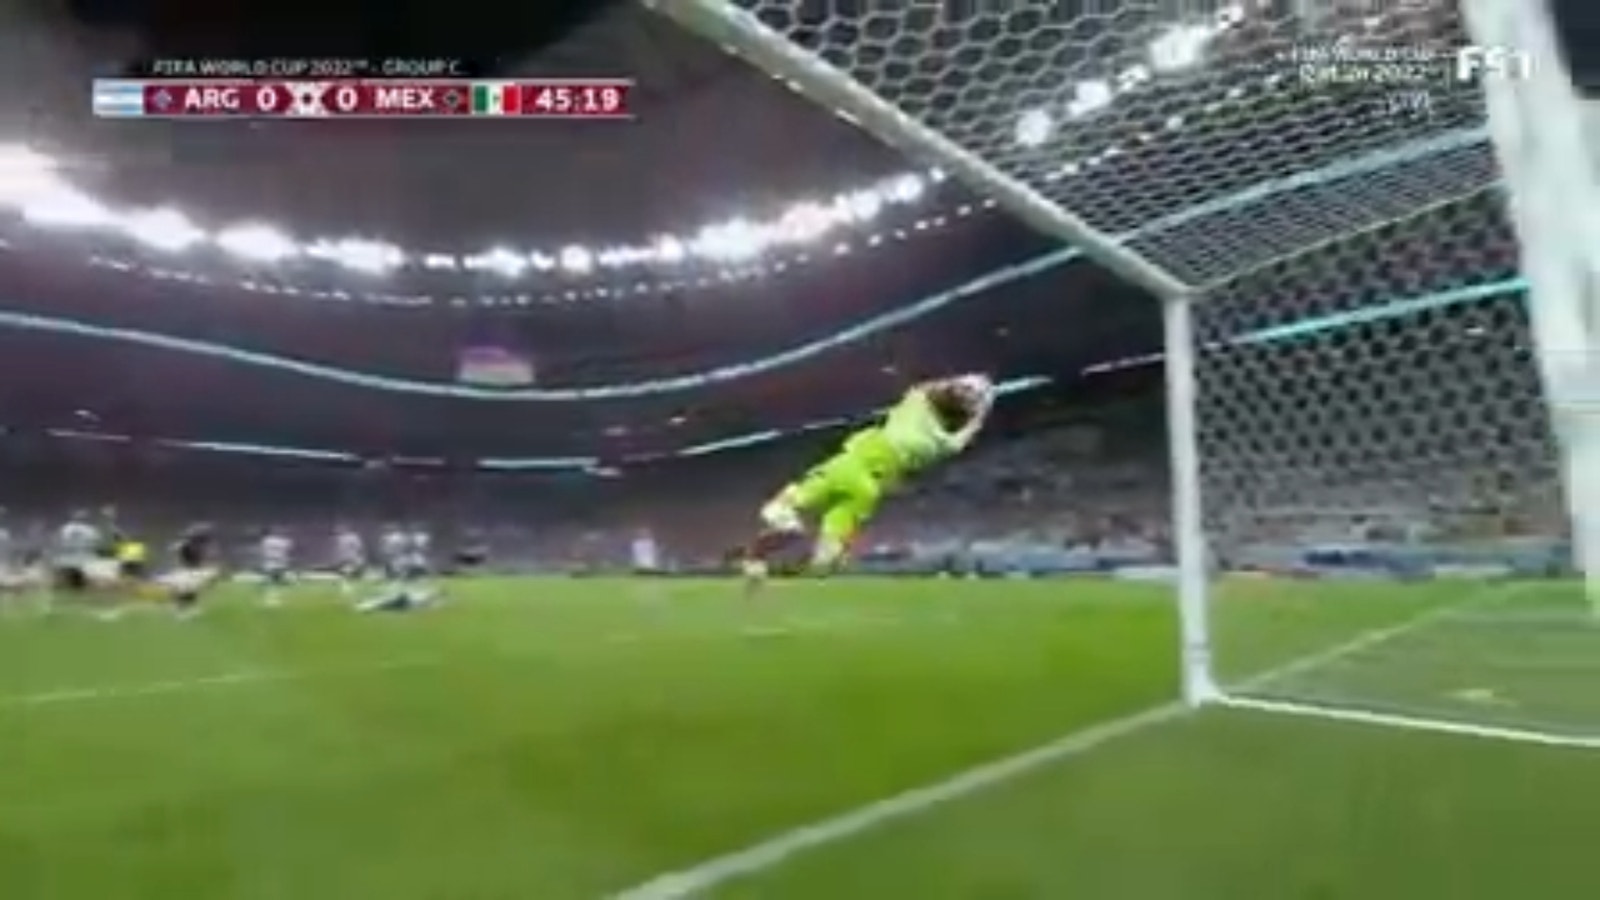 Argentina's Emiliano Martínez makes an INCREDIBLE save